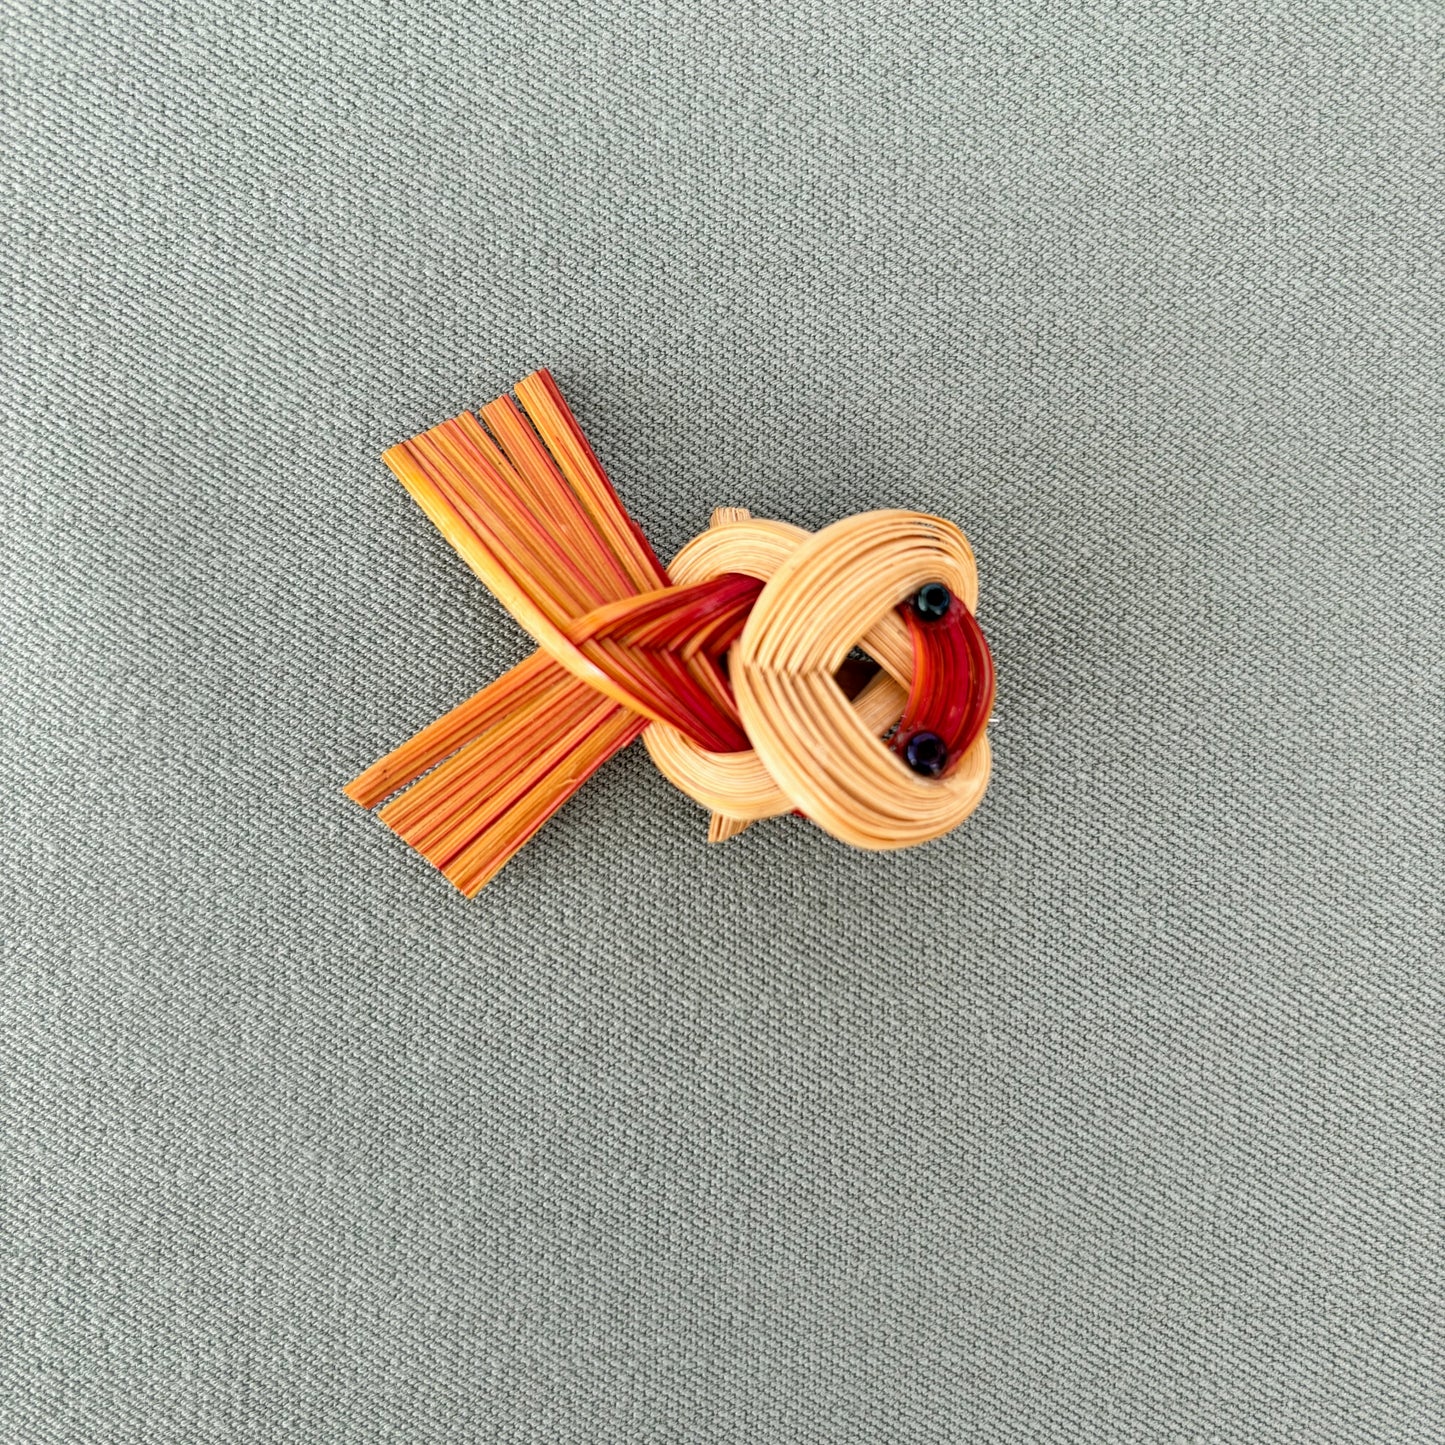 Vintage Twisted Bamboo Fish Brooch